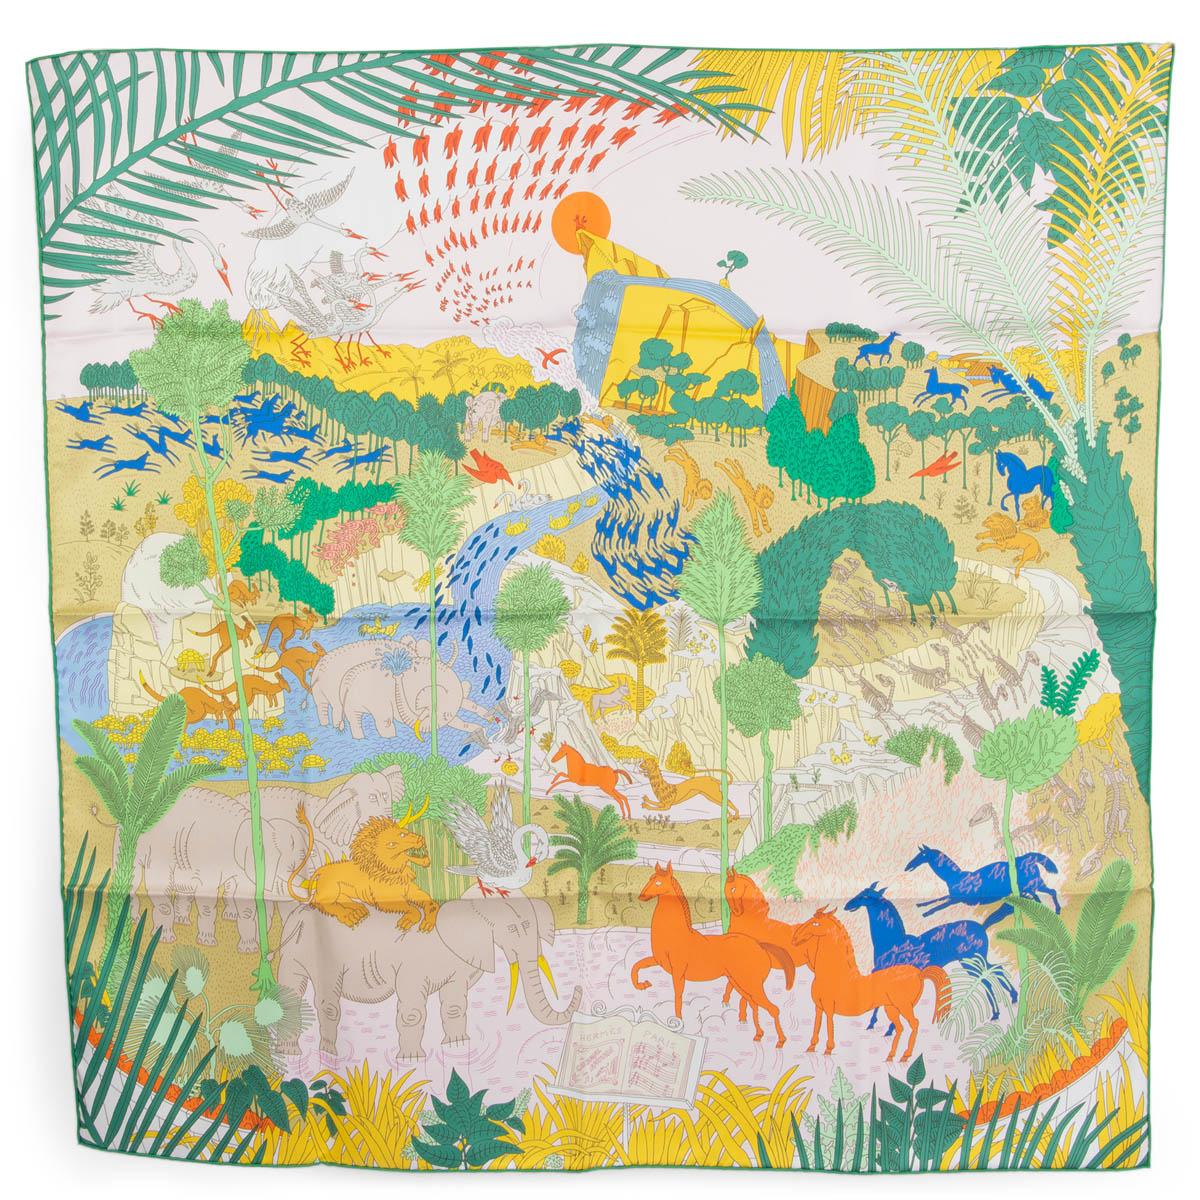 100% authentic Hermès Le Carnaval des Animaux 90 scarf by Thibaut Huchard in pale pink silk twill (100%) with contrasting green hem and details in yellow, orange, blue, khaki and taupe. Brand new with tag.

A river flows from the top of a hill,